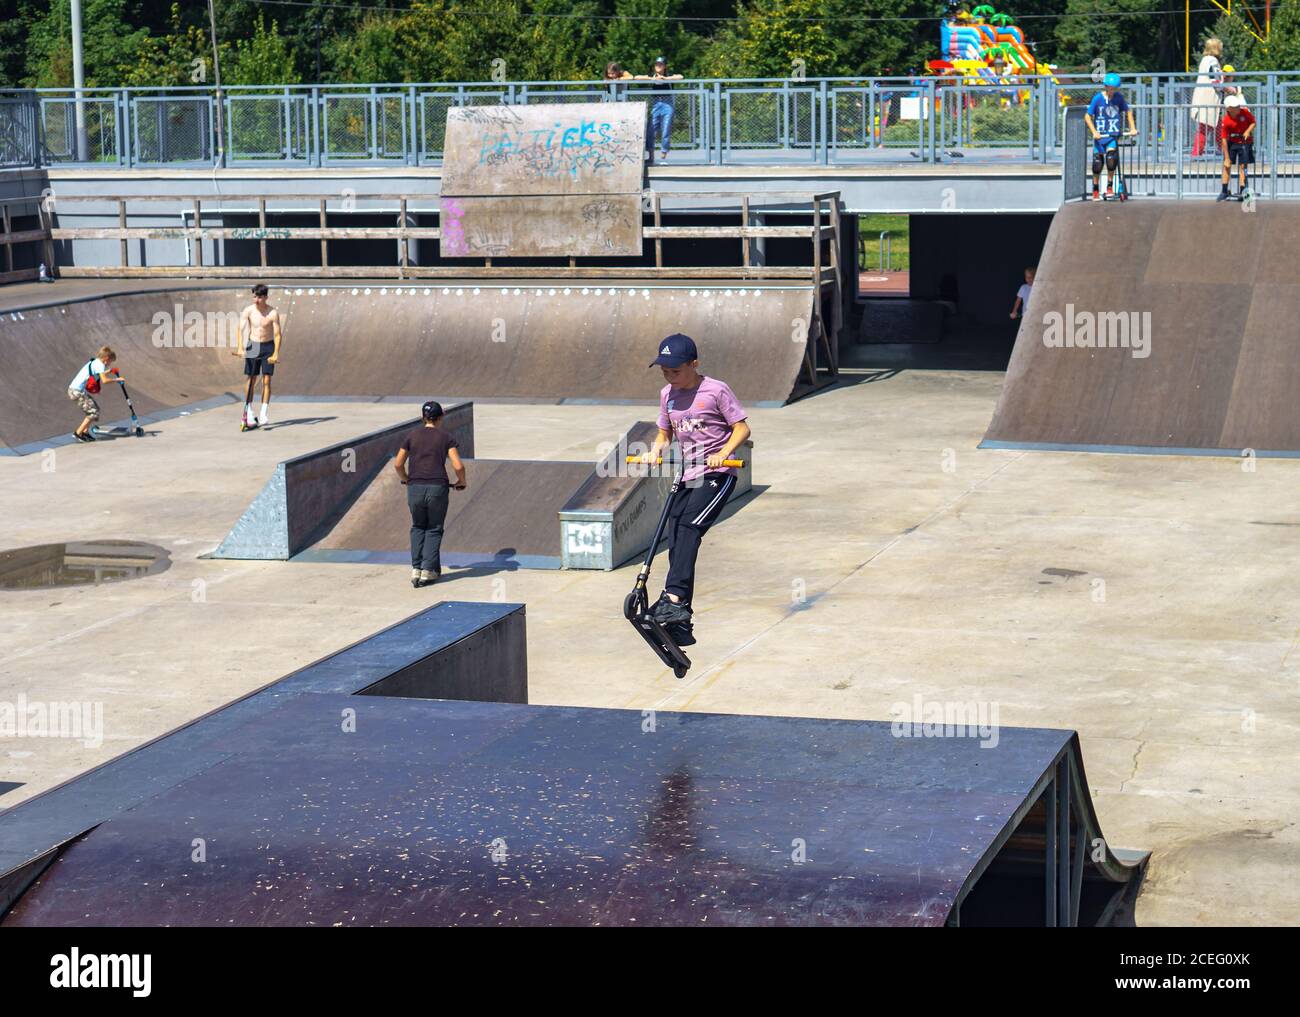 stunt scooters, young people in a skate Park, scooter sport, freestyle  scootering, Russia, Kaliningrad, Kaliningrad skate Park, August 5, 2020  Stock Photo - Alamy